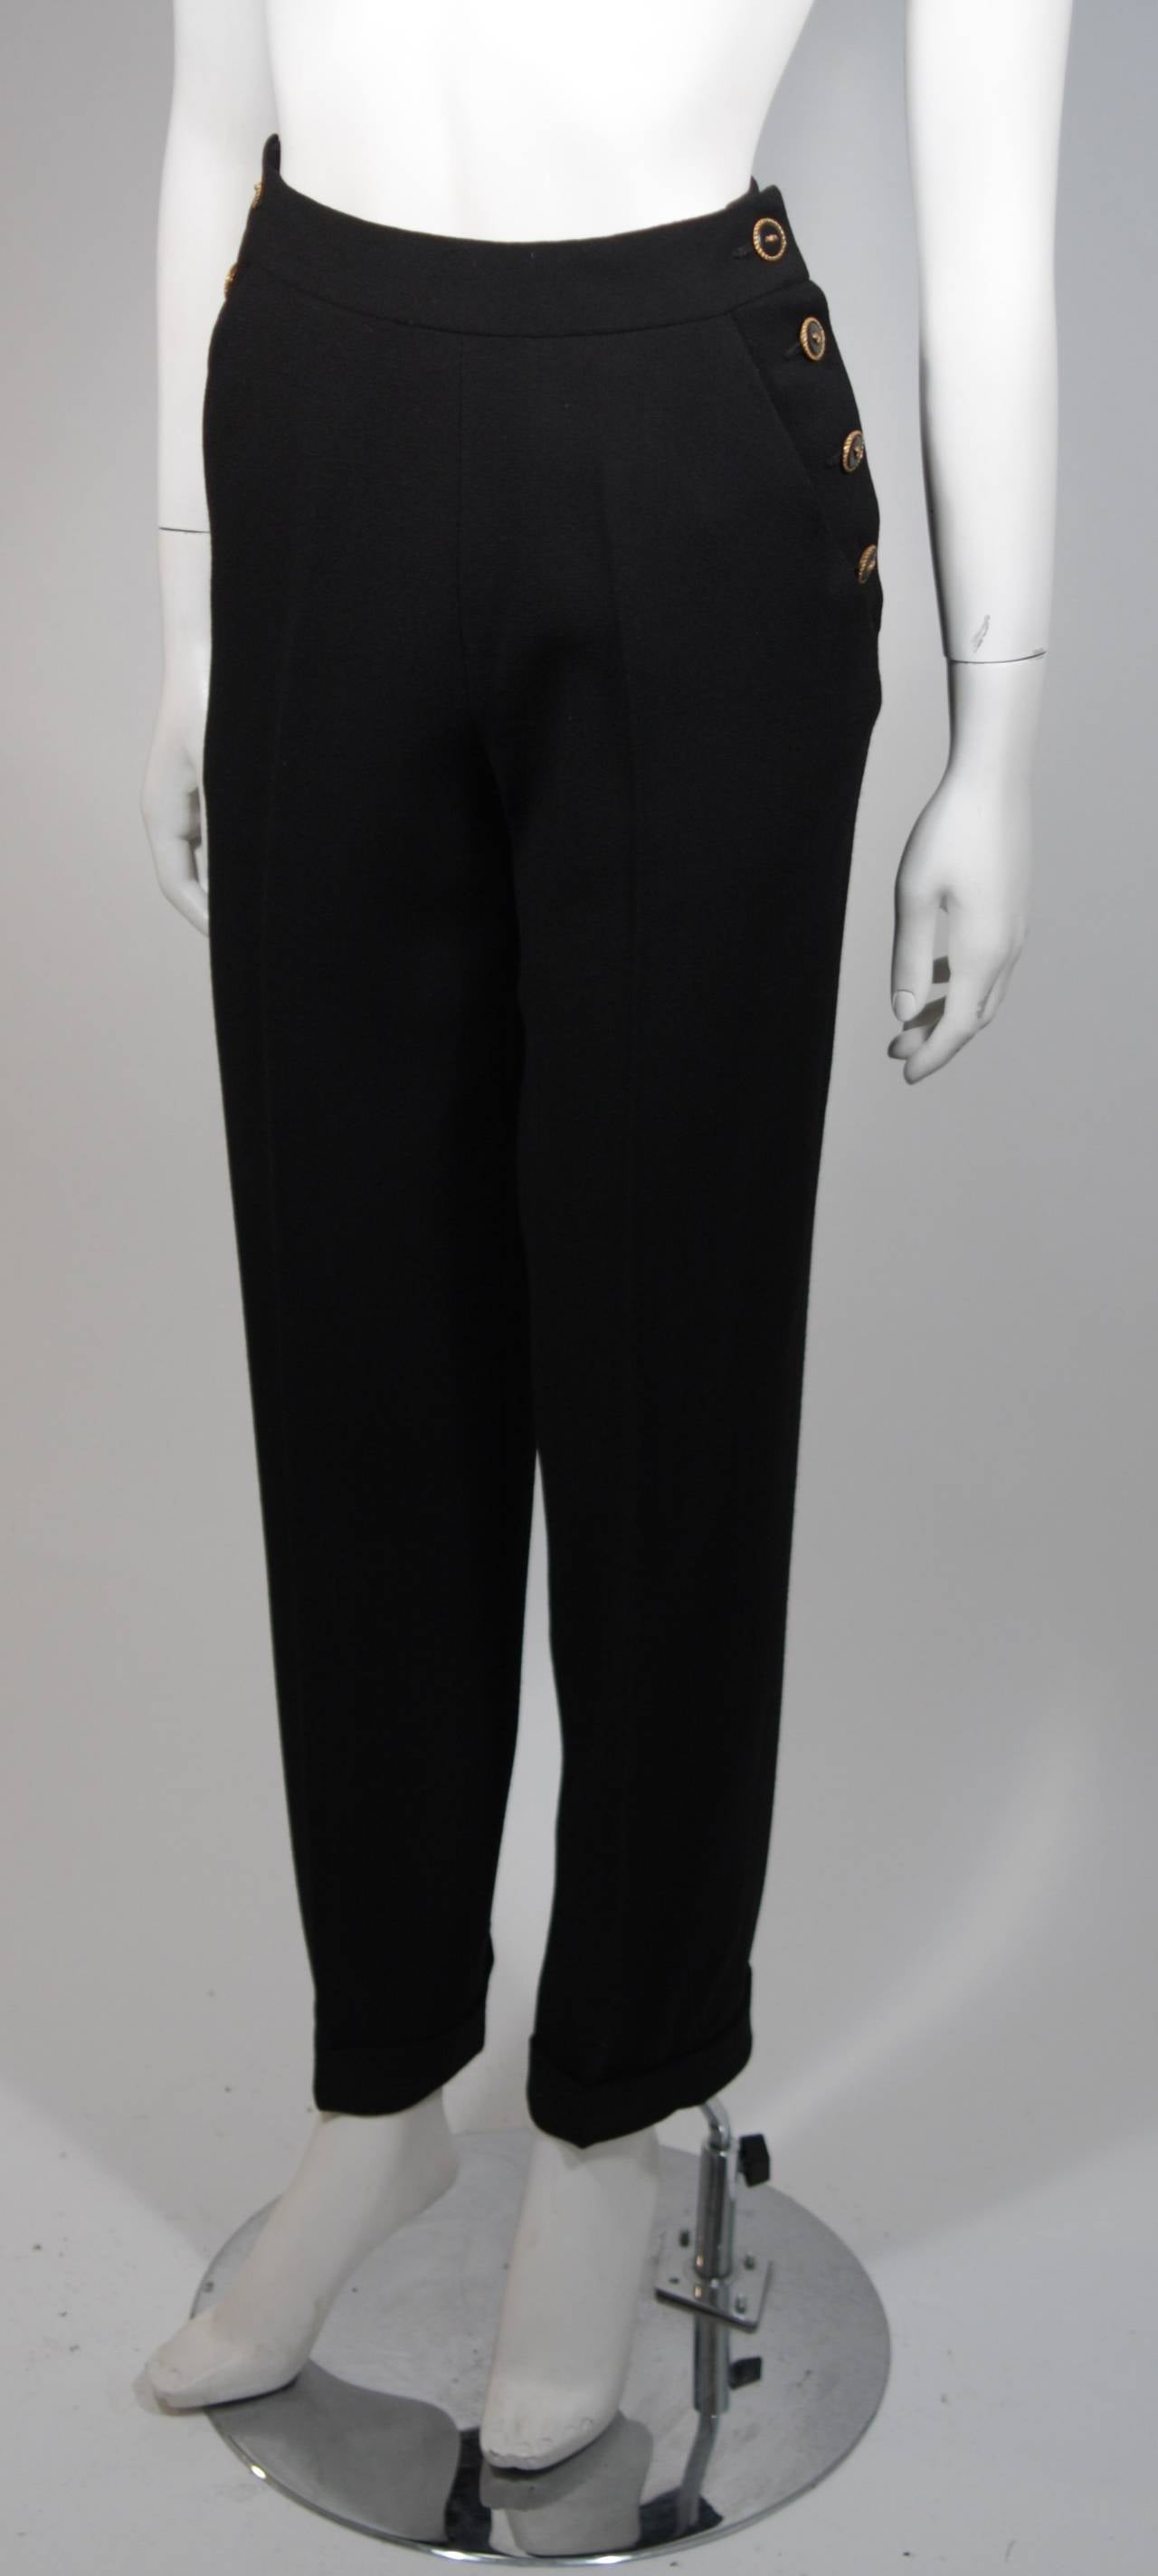 Chanel Haute Couture Black Wool Sailor Inspired Suit Size 2-4 EU 34-36 ...